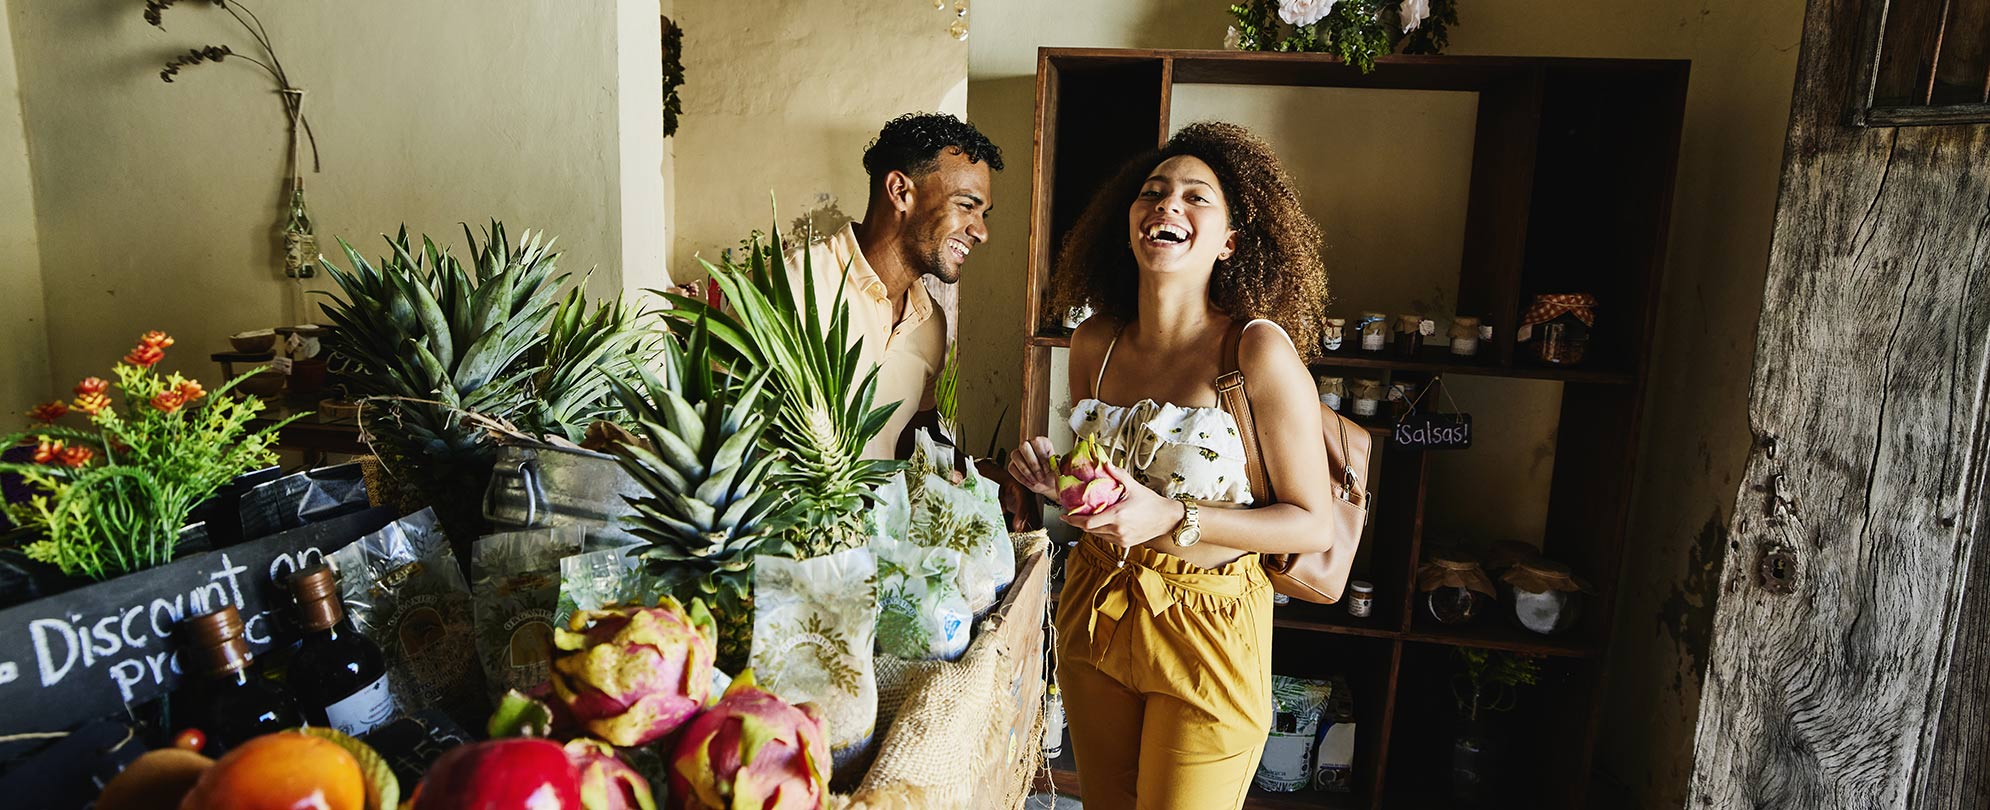 Man and woman laughing in local plant shop.